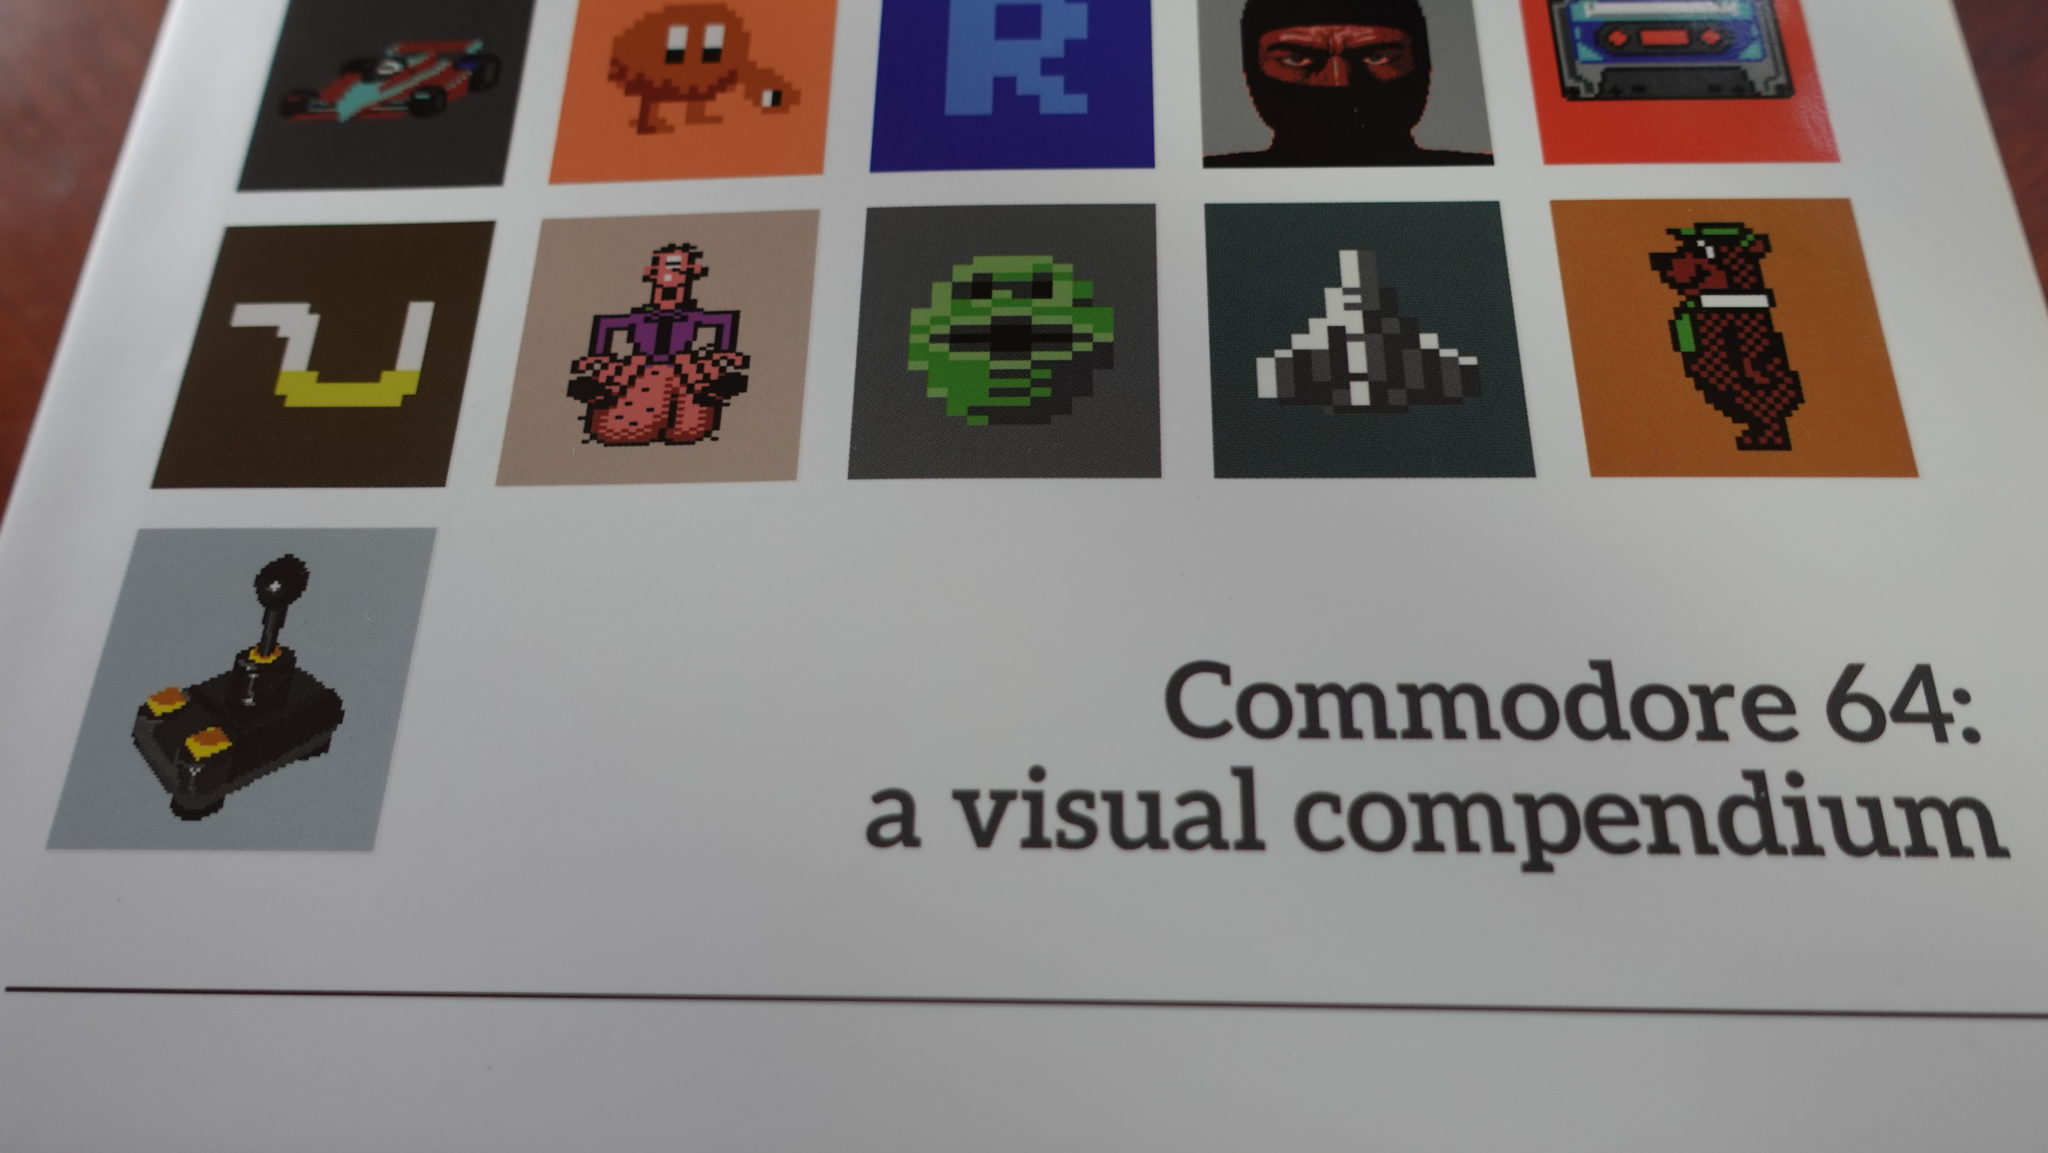 Commodore 64: A Visual Compendium by Bitmap Books Overview